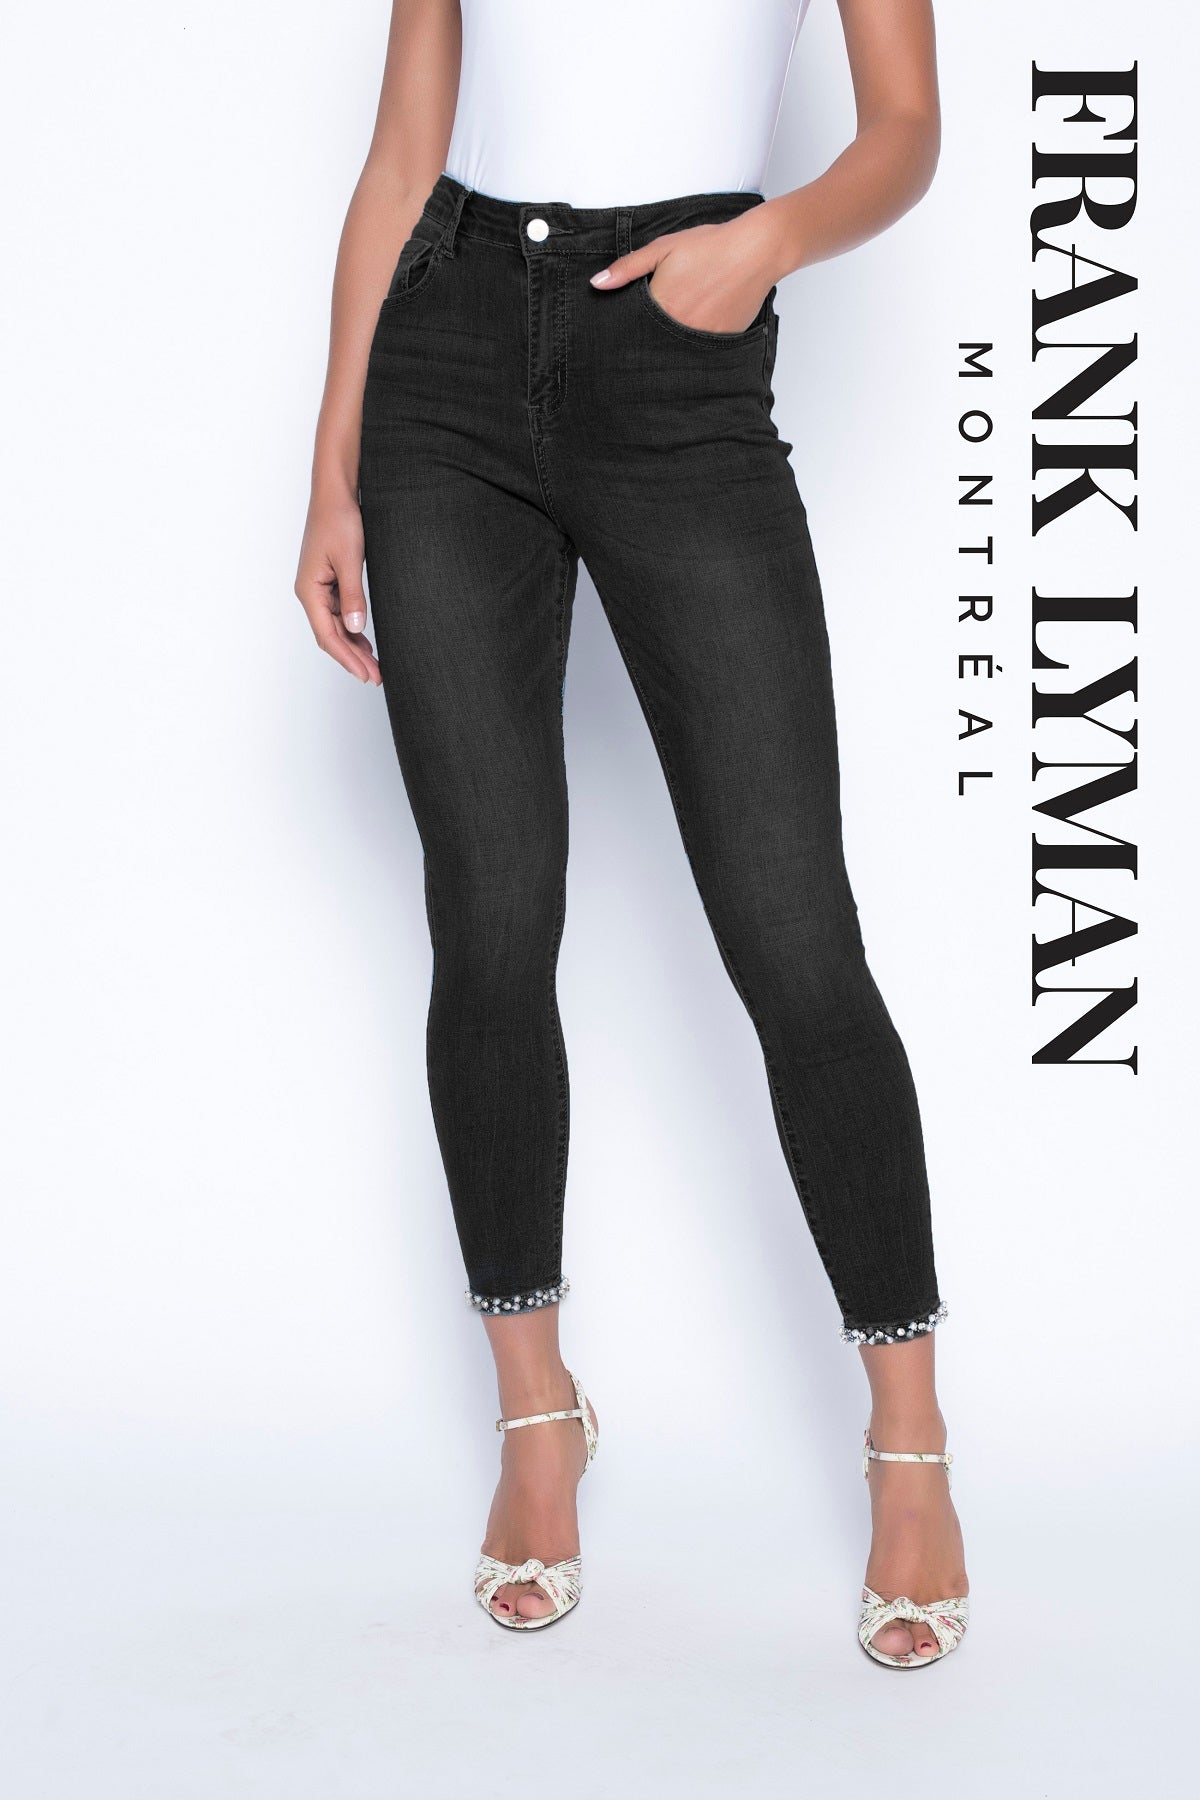 Frank Lyman Montreal Black Pearl Bow Detail Jeans